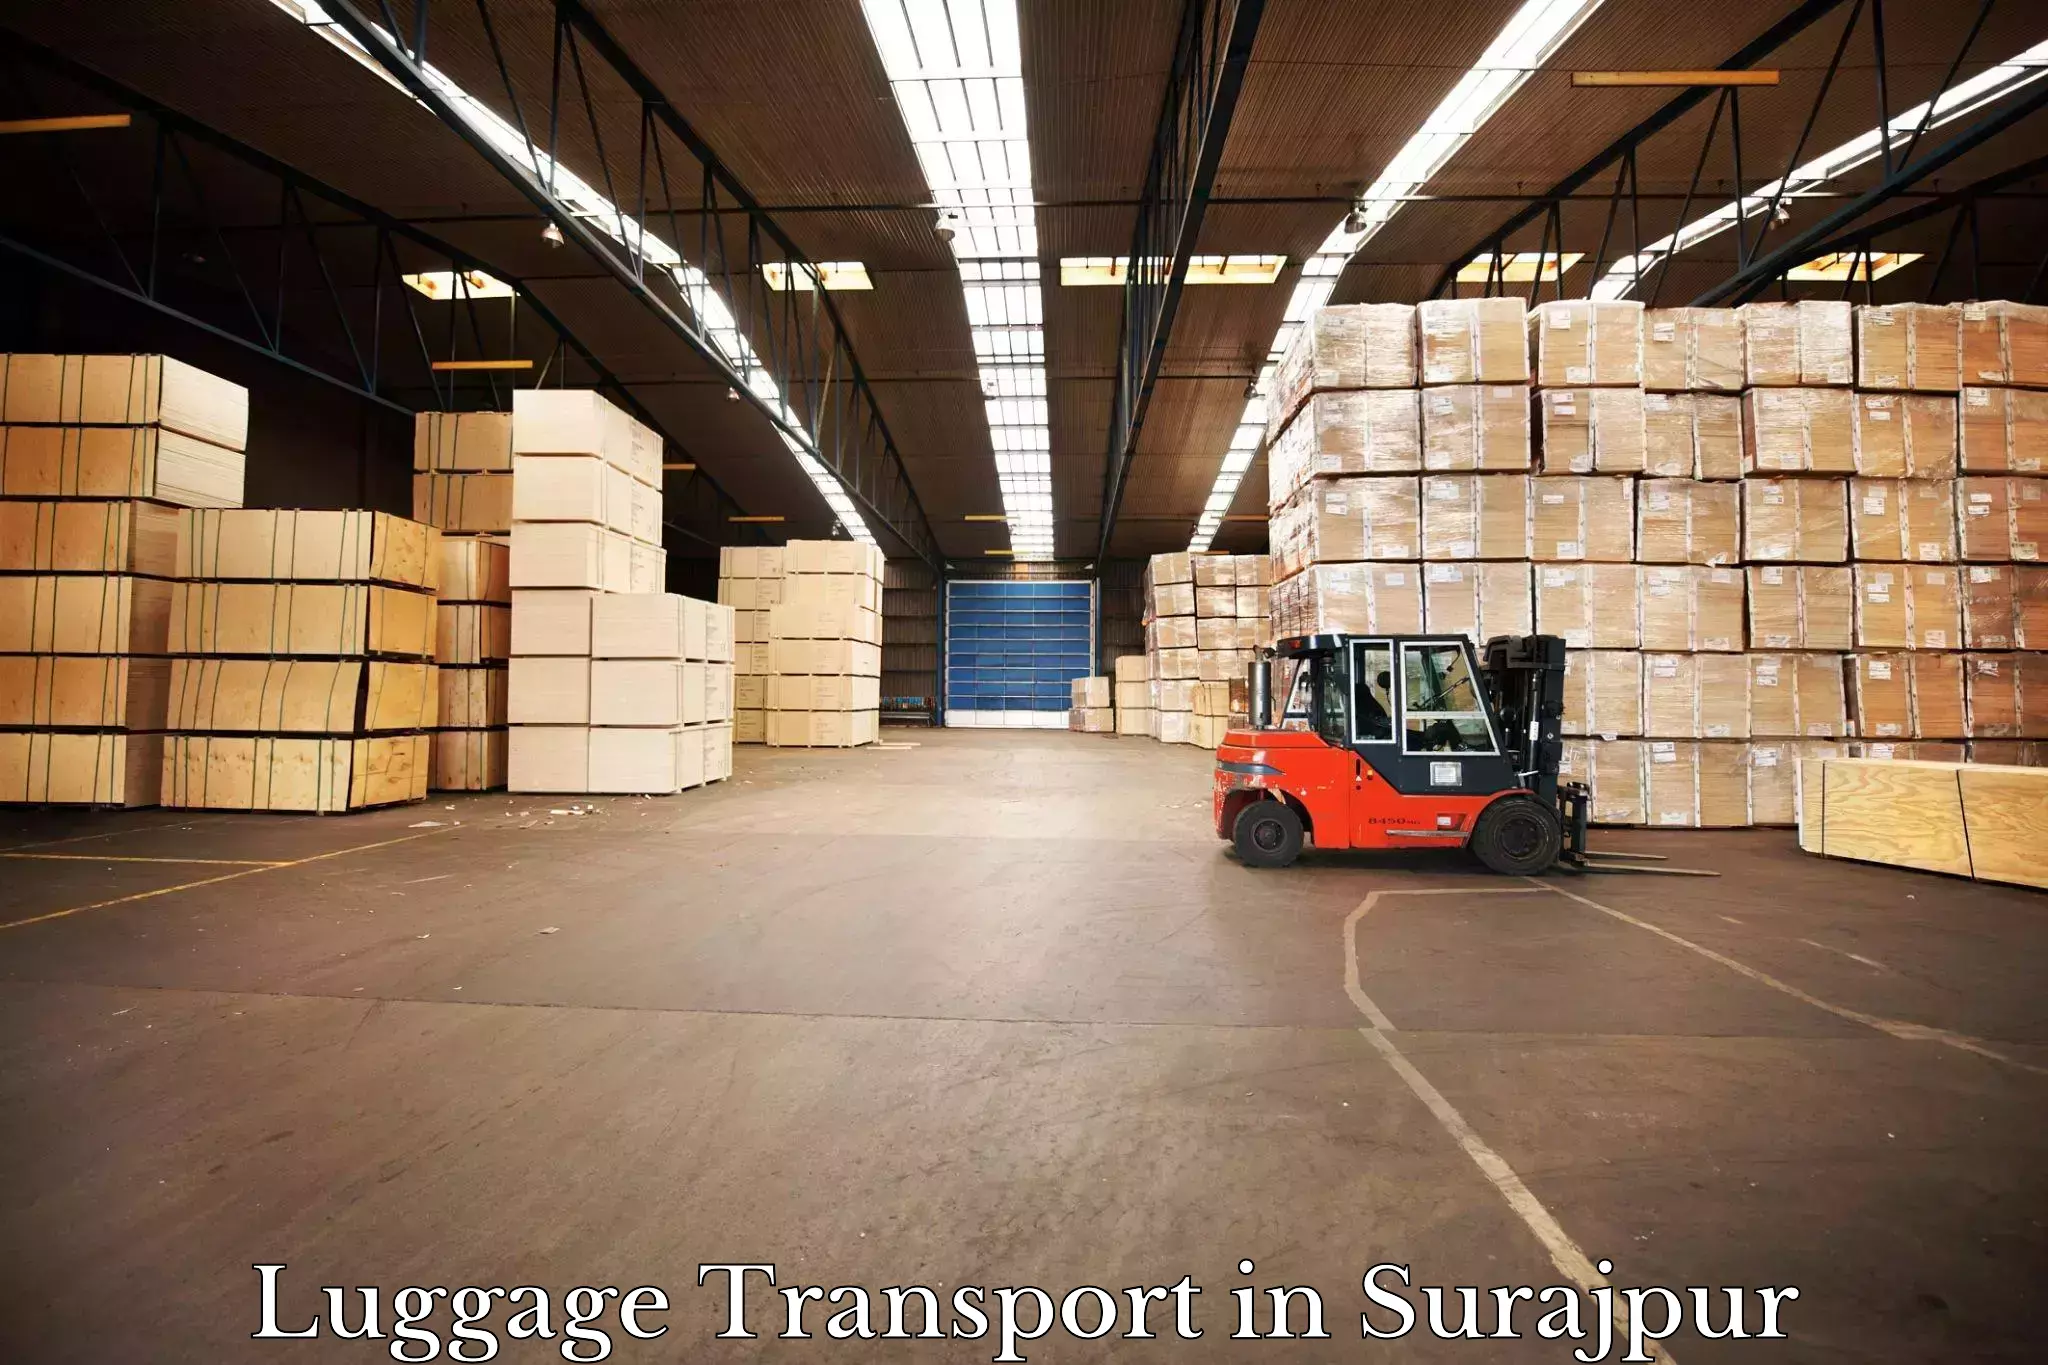 Hassle-free luggage shipping in Surajpur